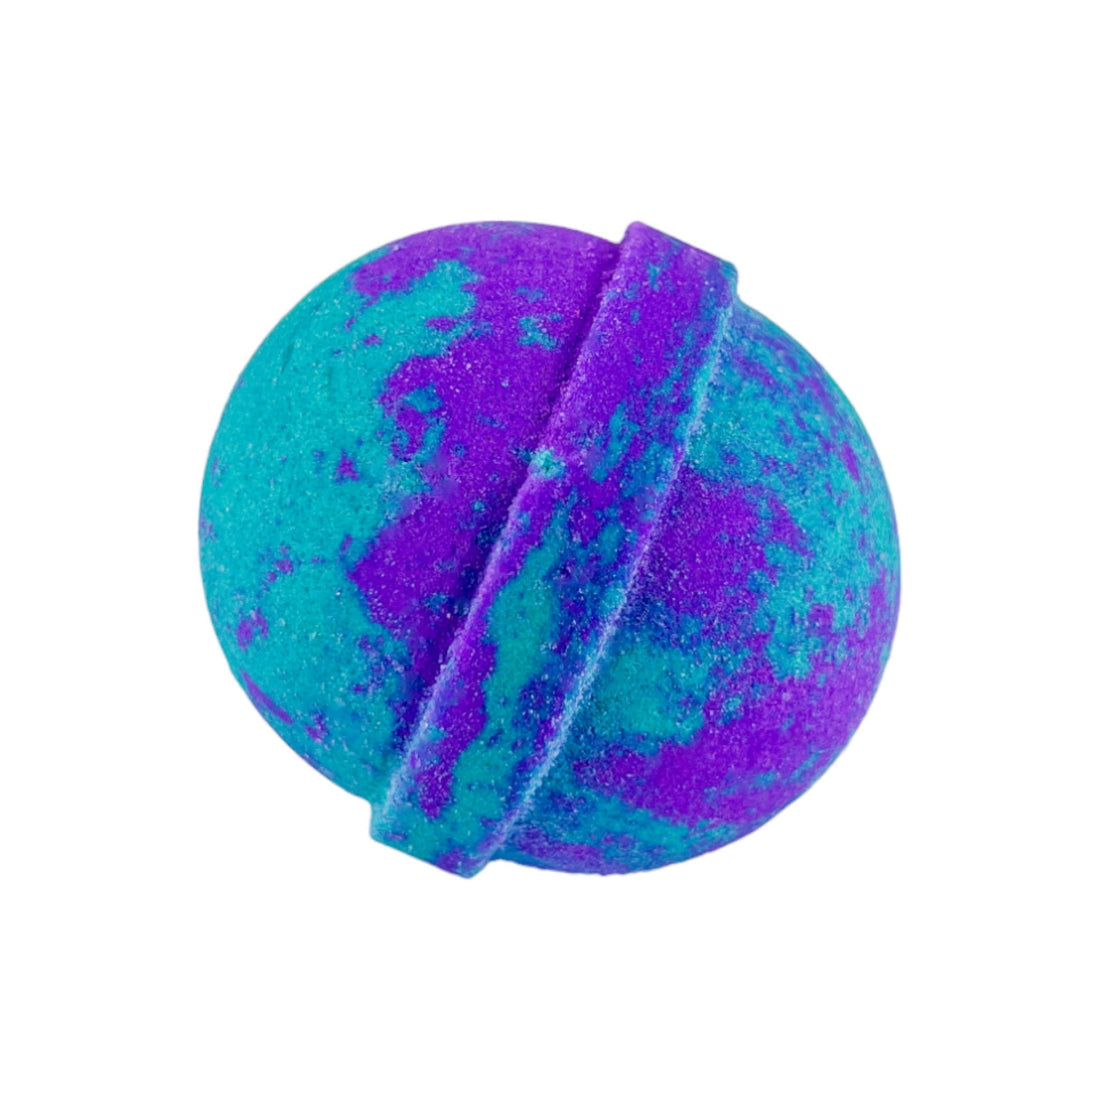 Sleepy Time Bath Bomb -Large - Old Town Soap Co.